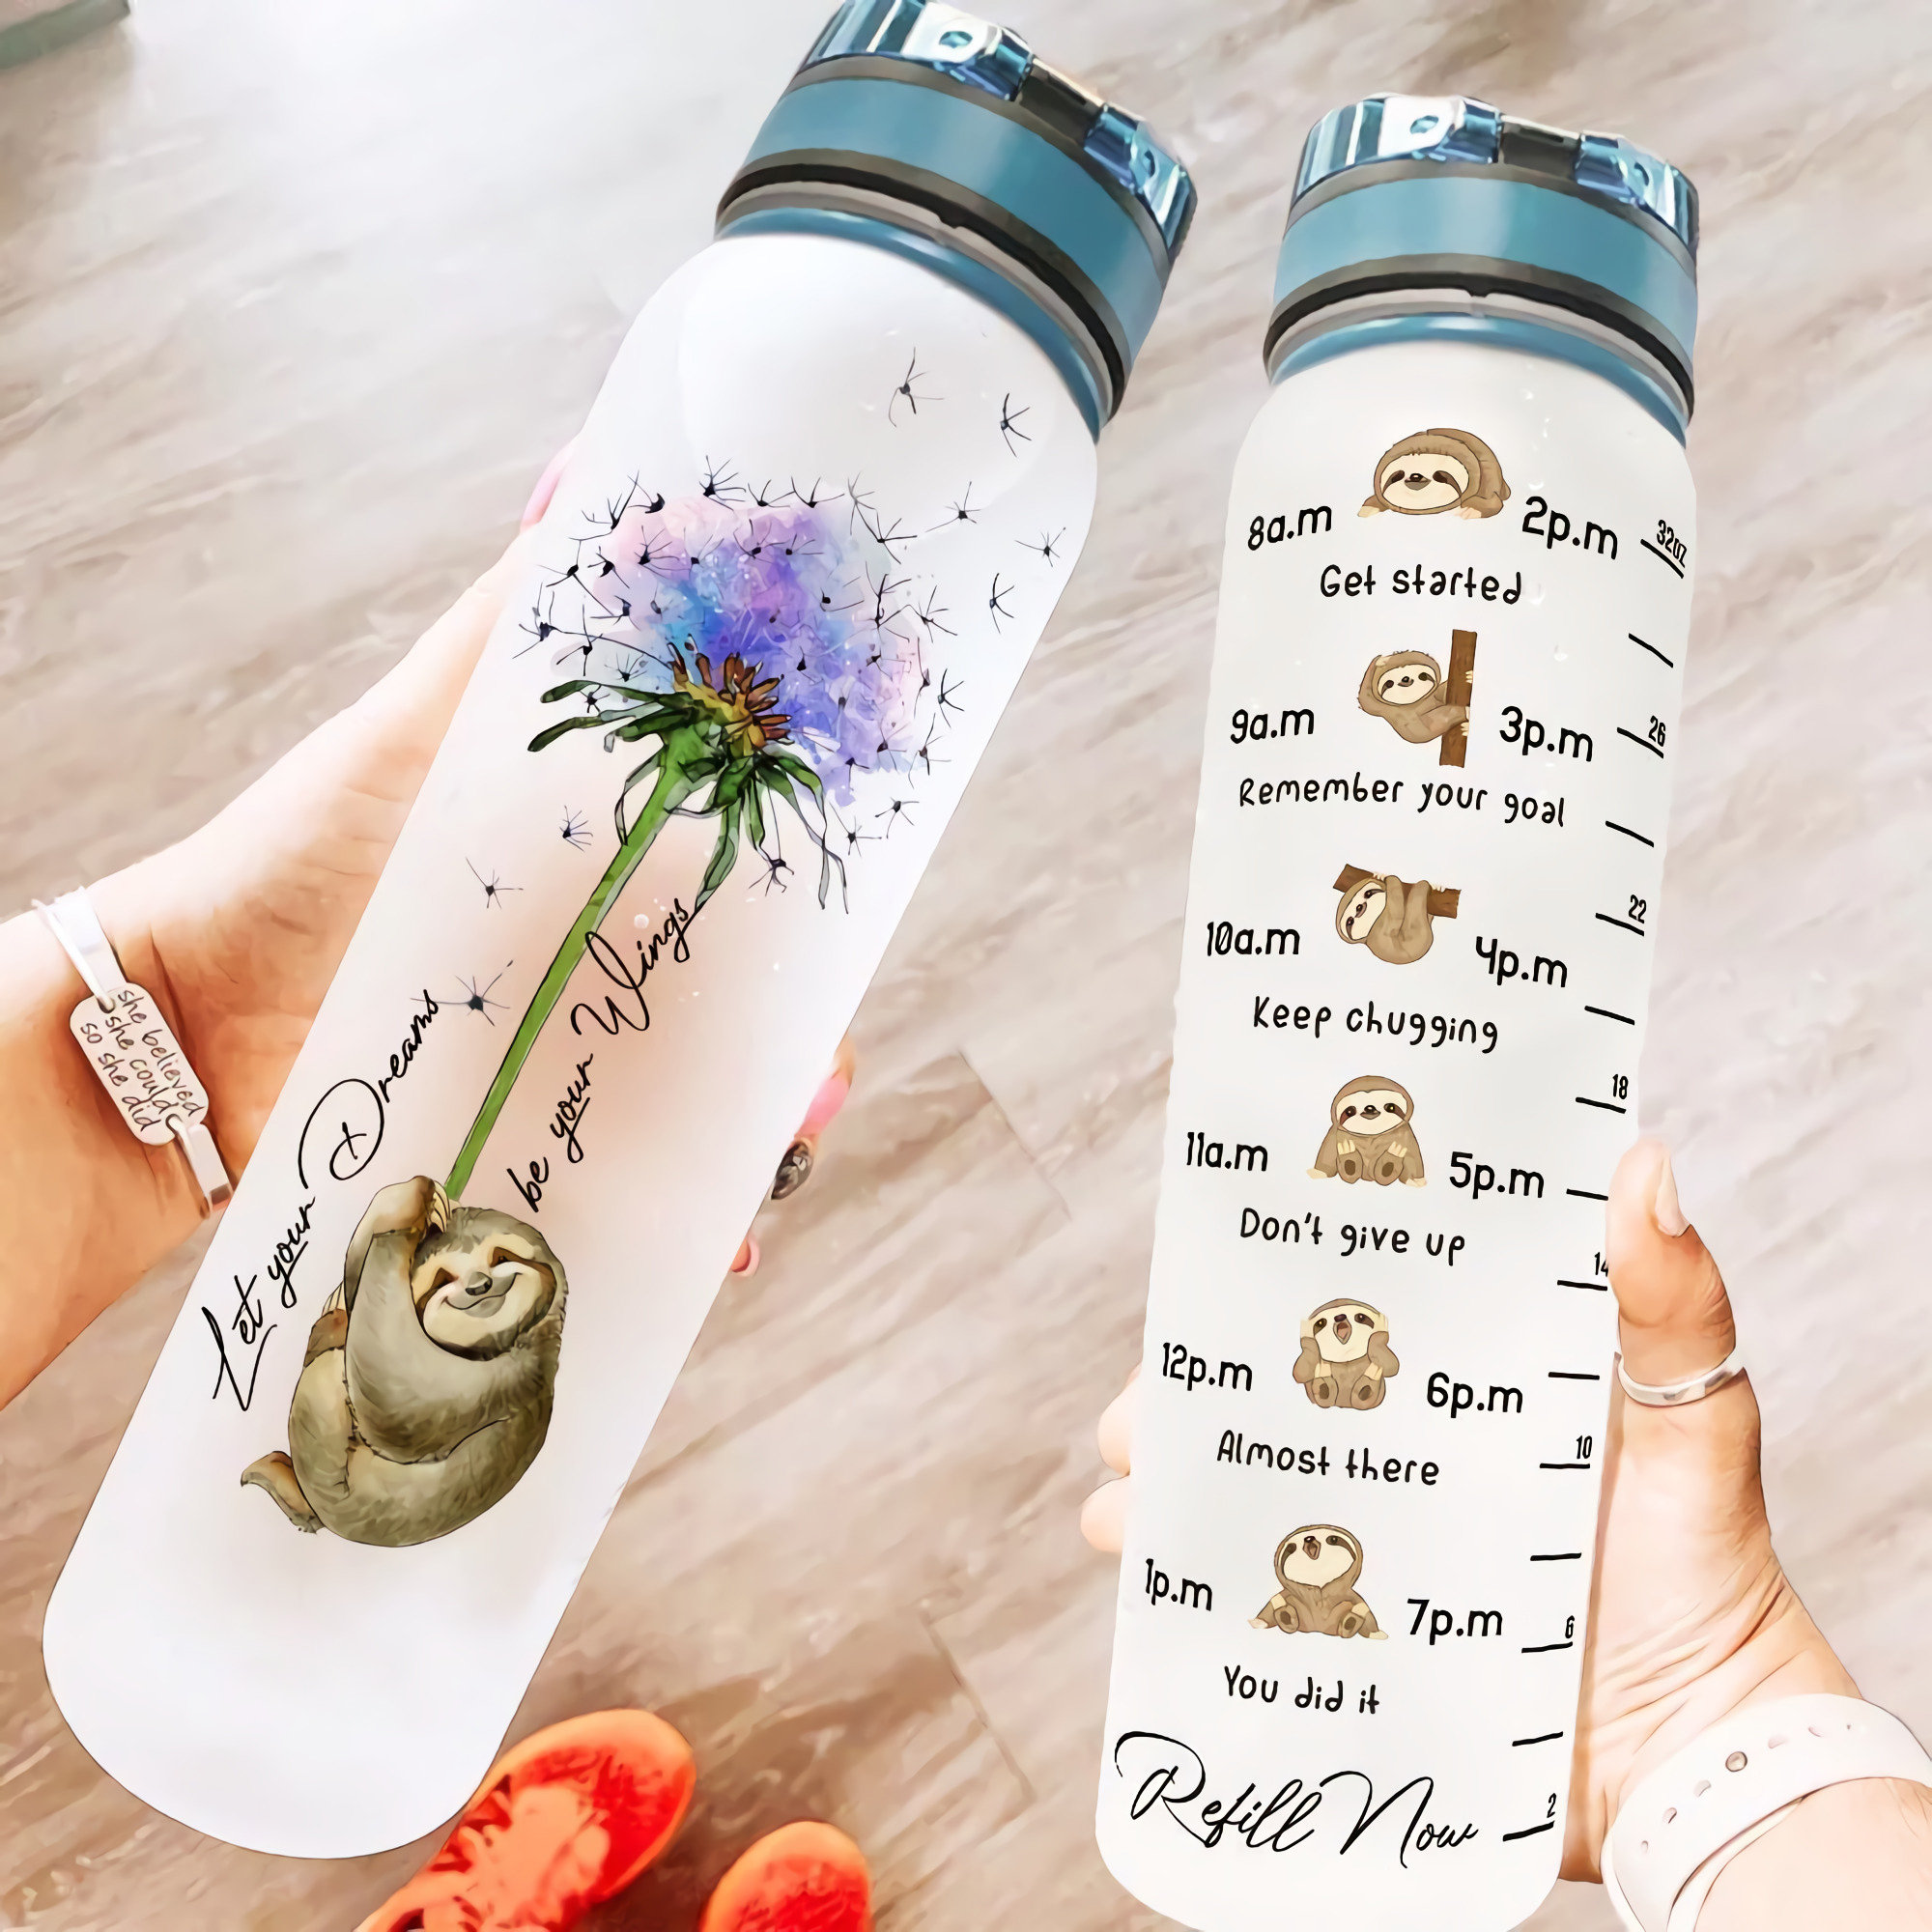 You Left Me Beautiful Memories on 32 oz Motivational Tracking Water Bottle Clear Frosted